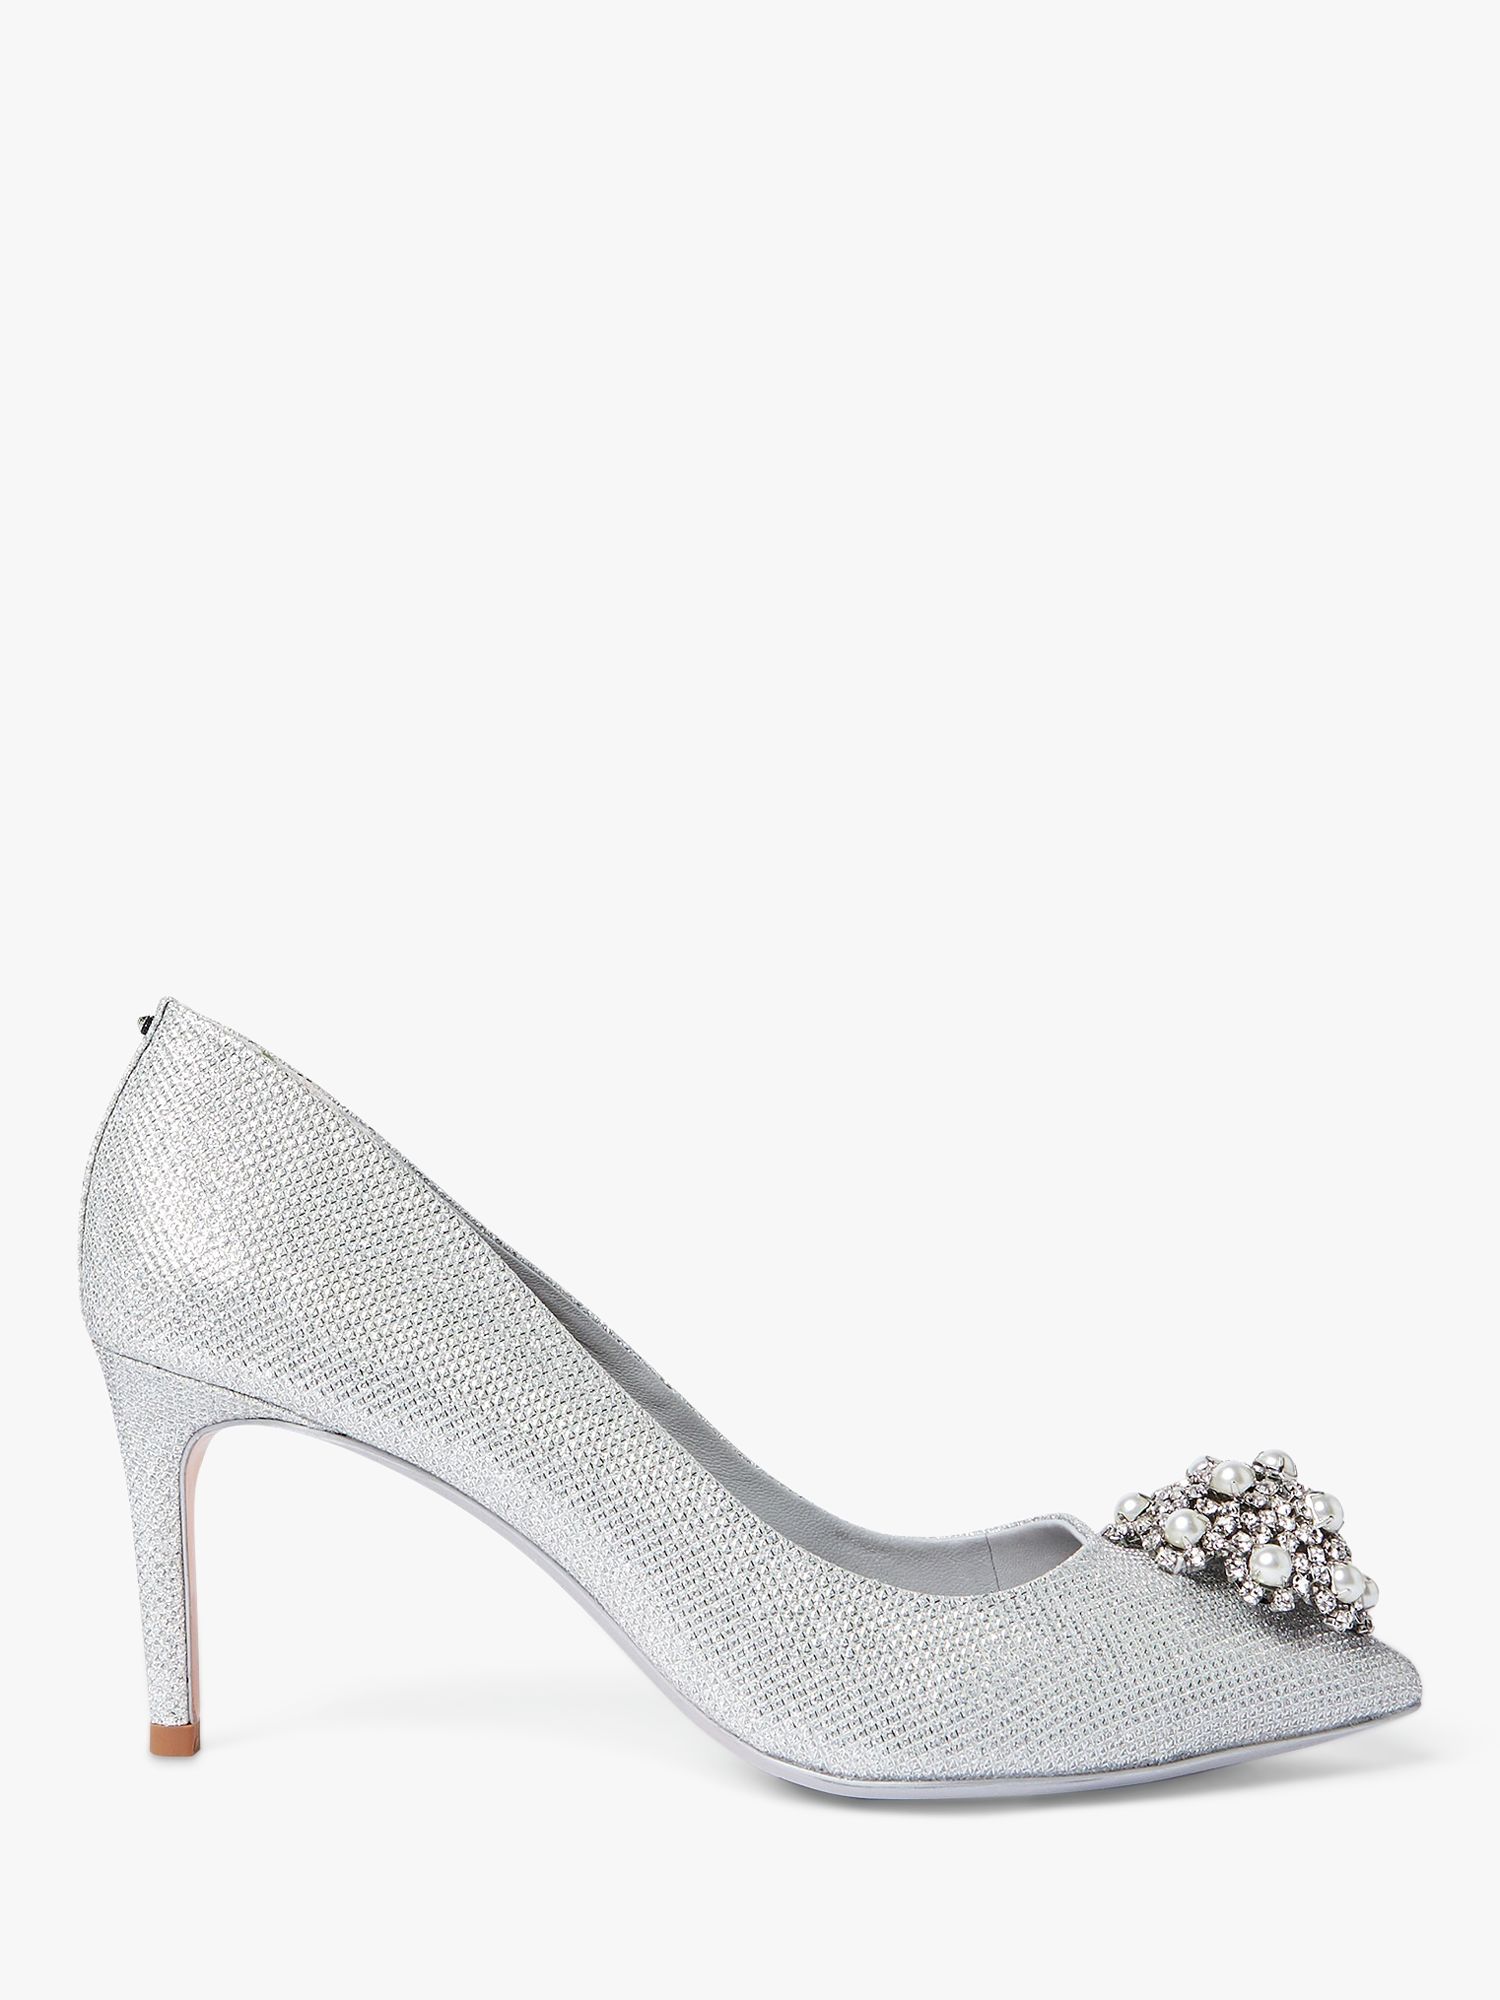 silver court shoes uk